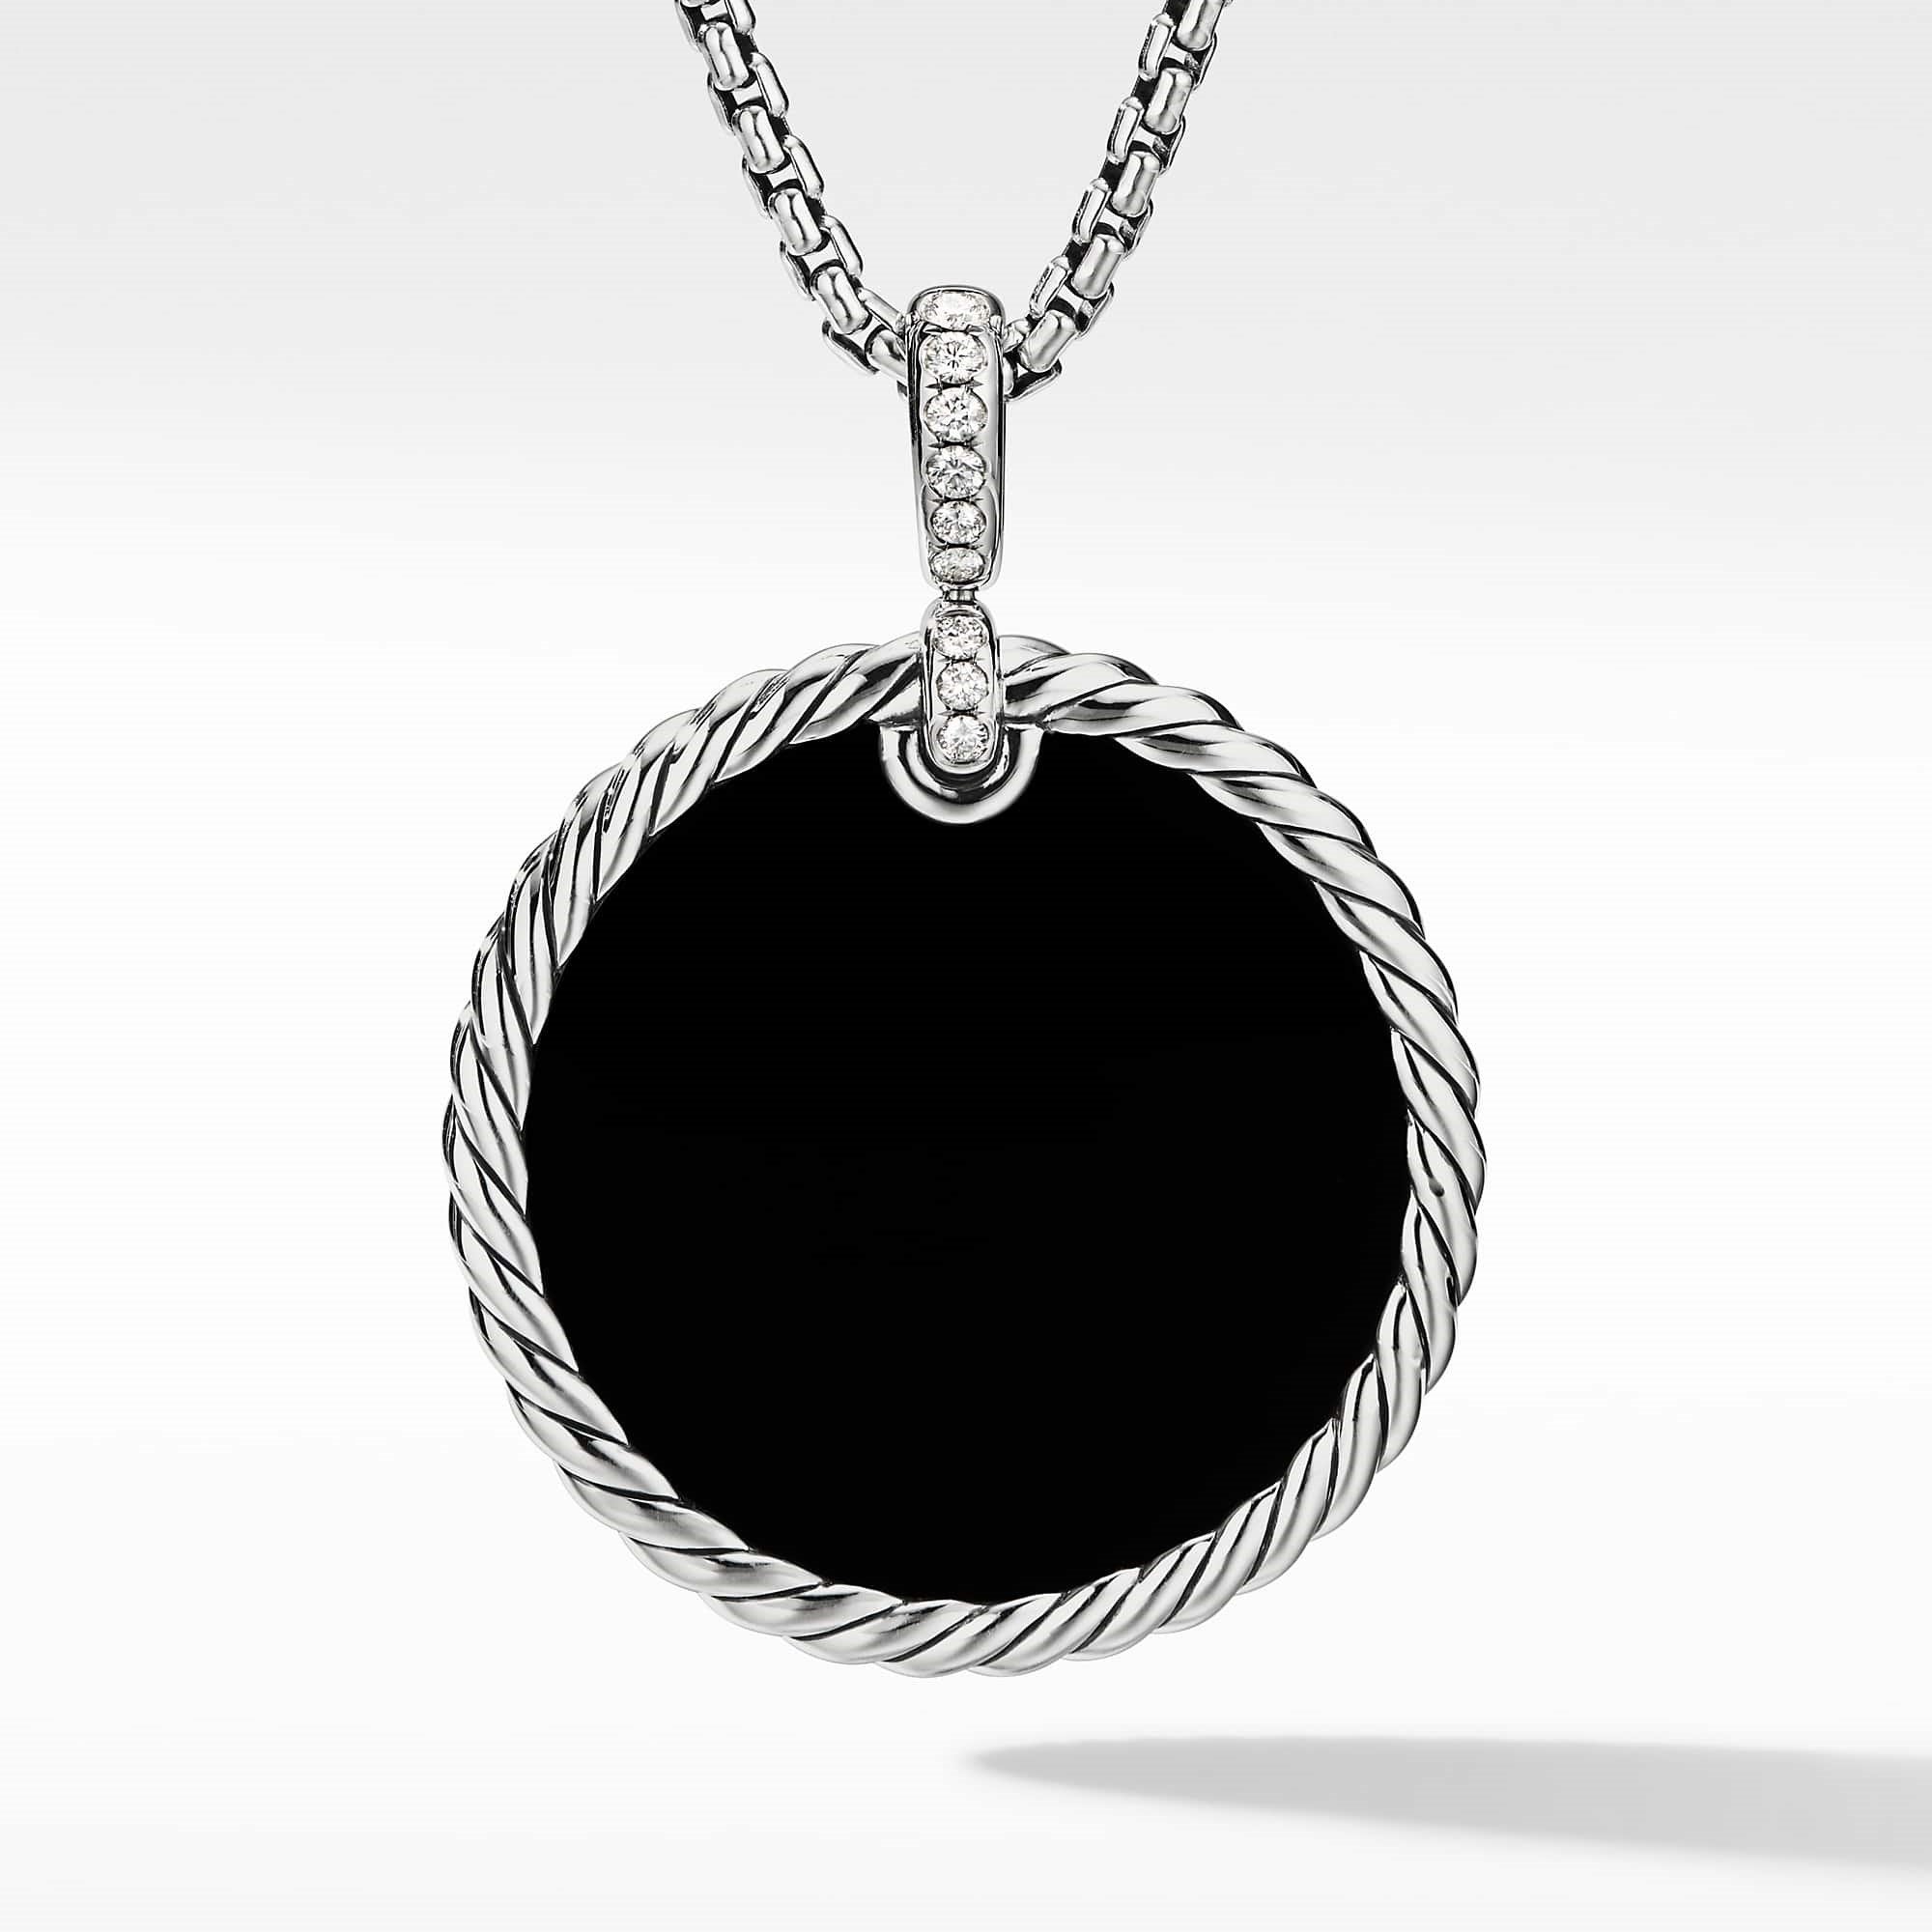 DY Elements® Reversible Disc Pendant with Black Onyx and Mother of Pearl and Pavé Diamonds